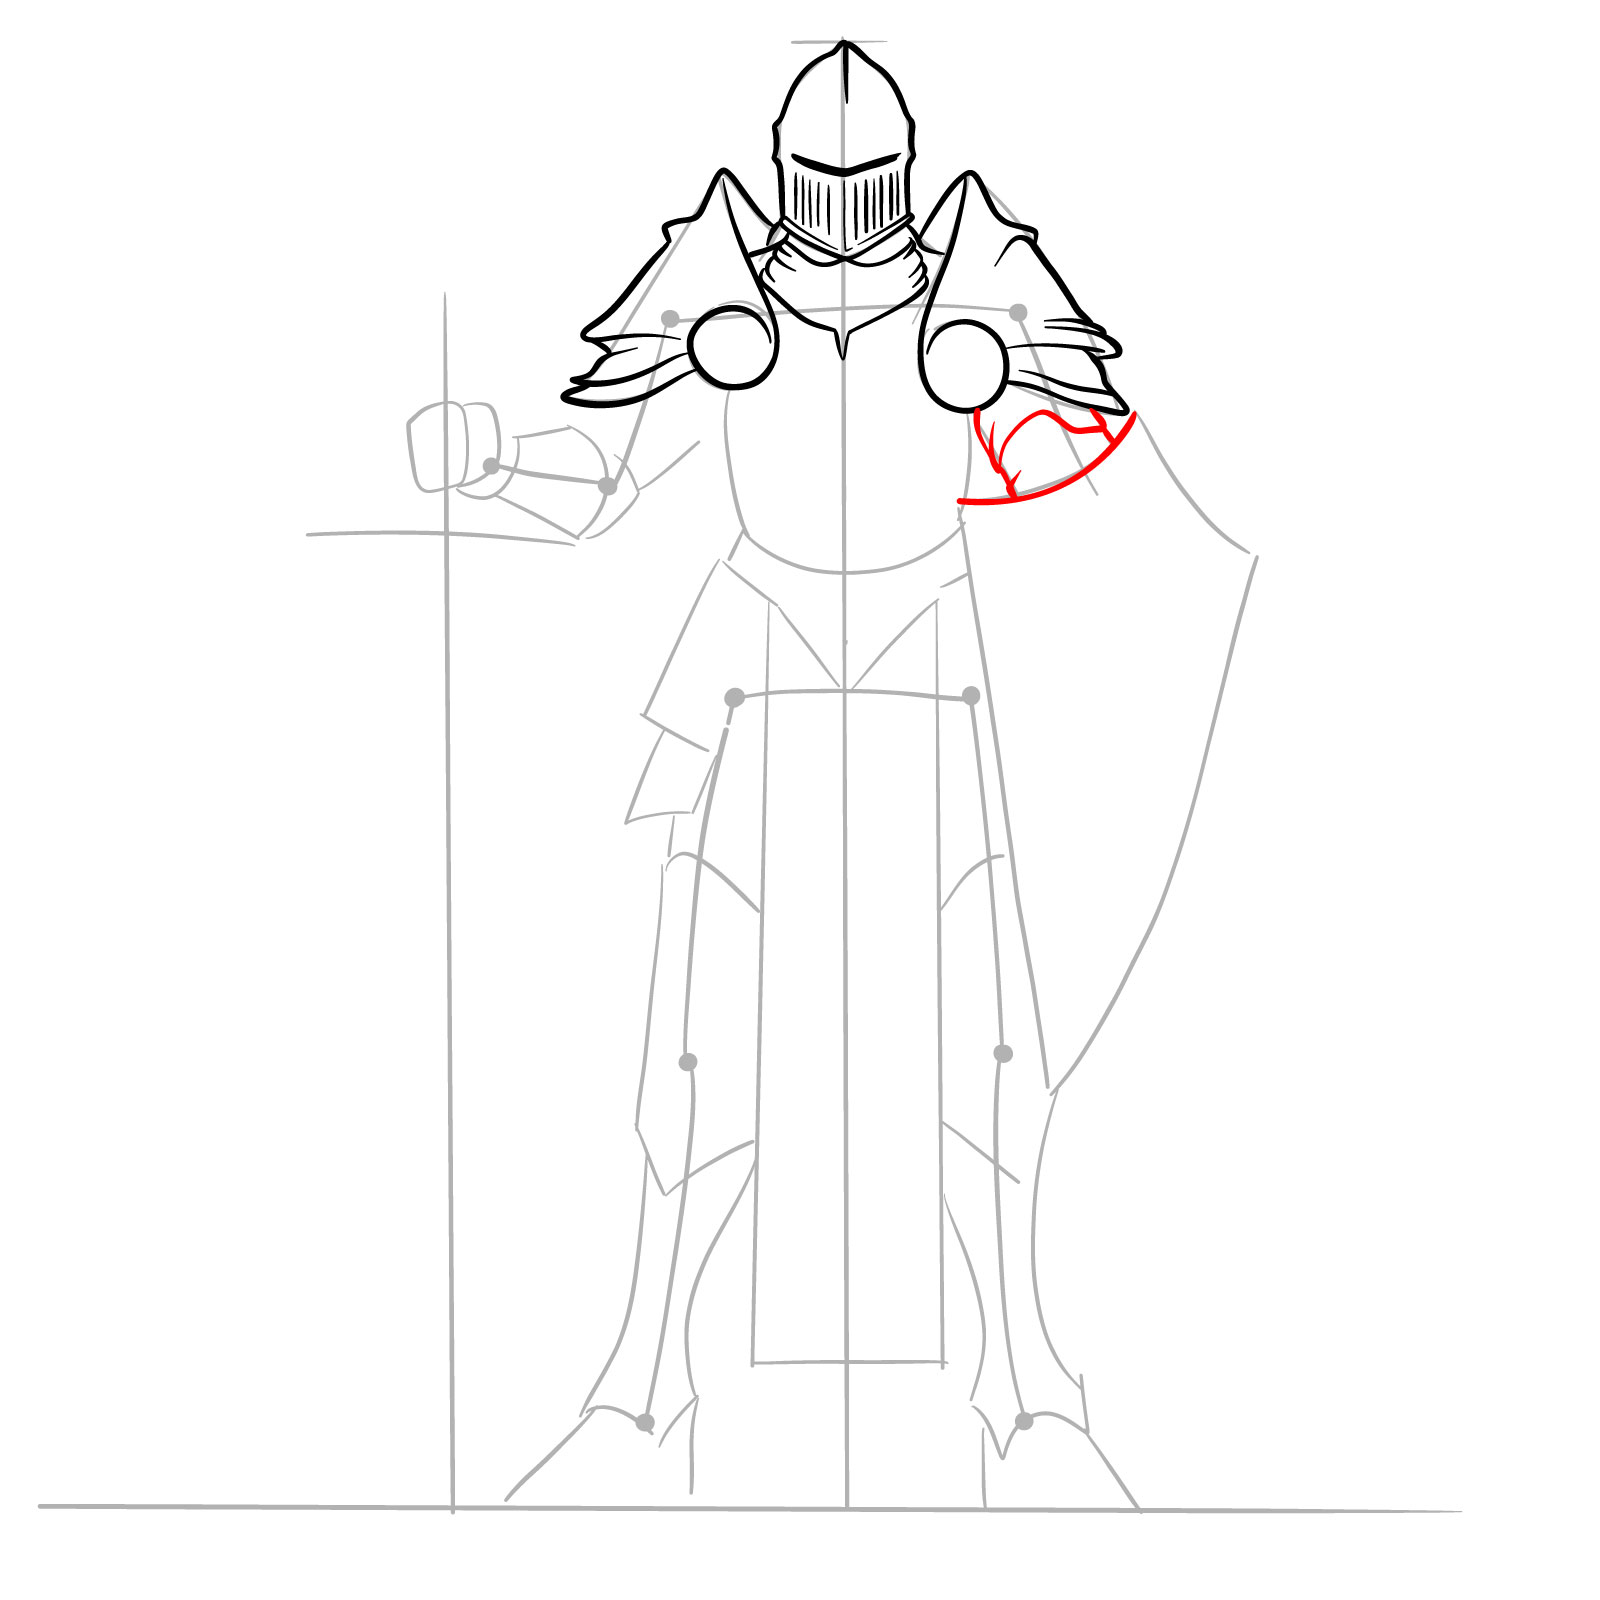 Realistic paladin step 9: arm and partial shield